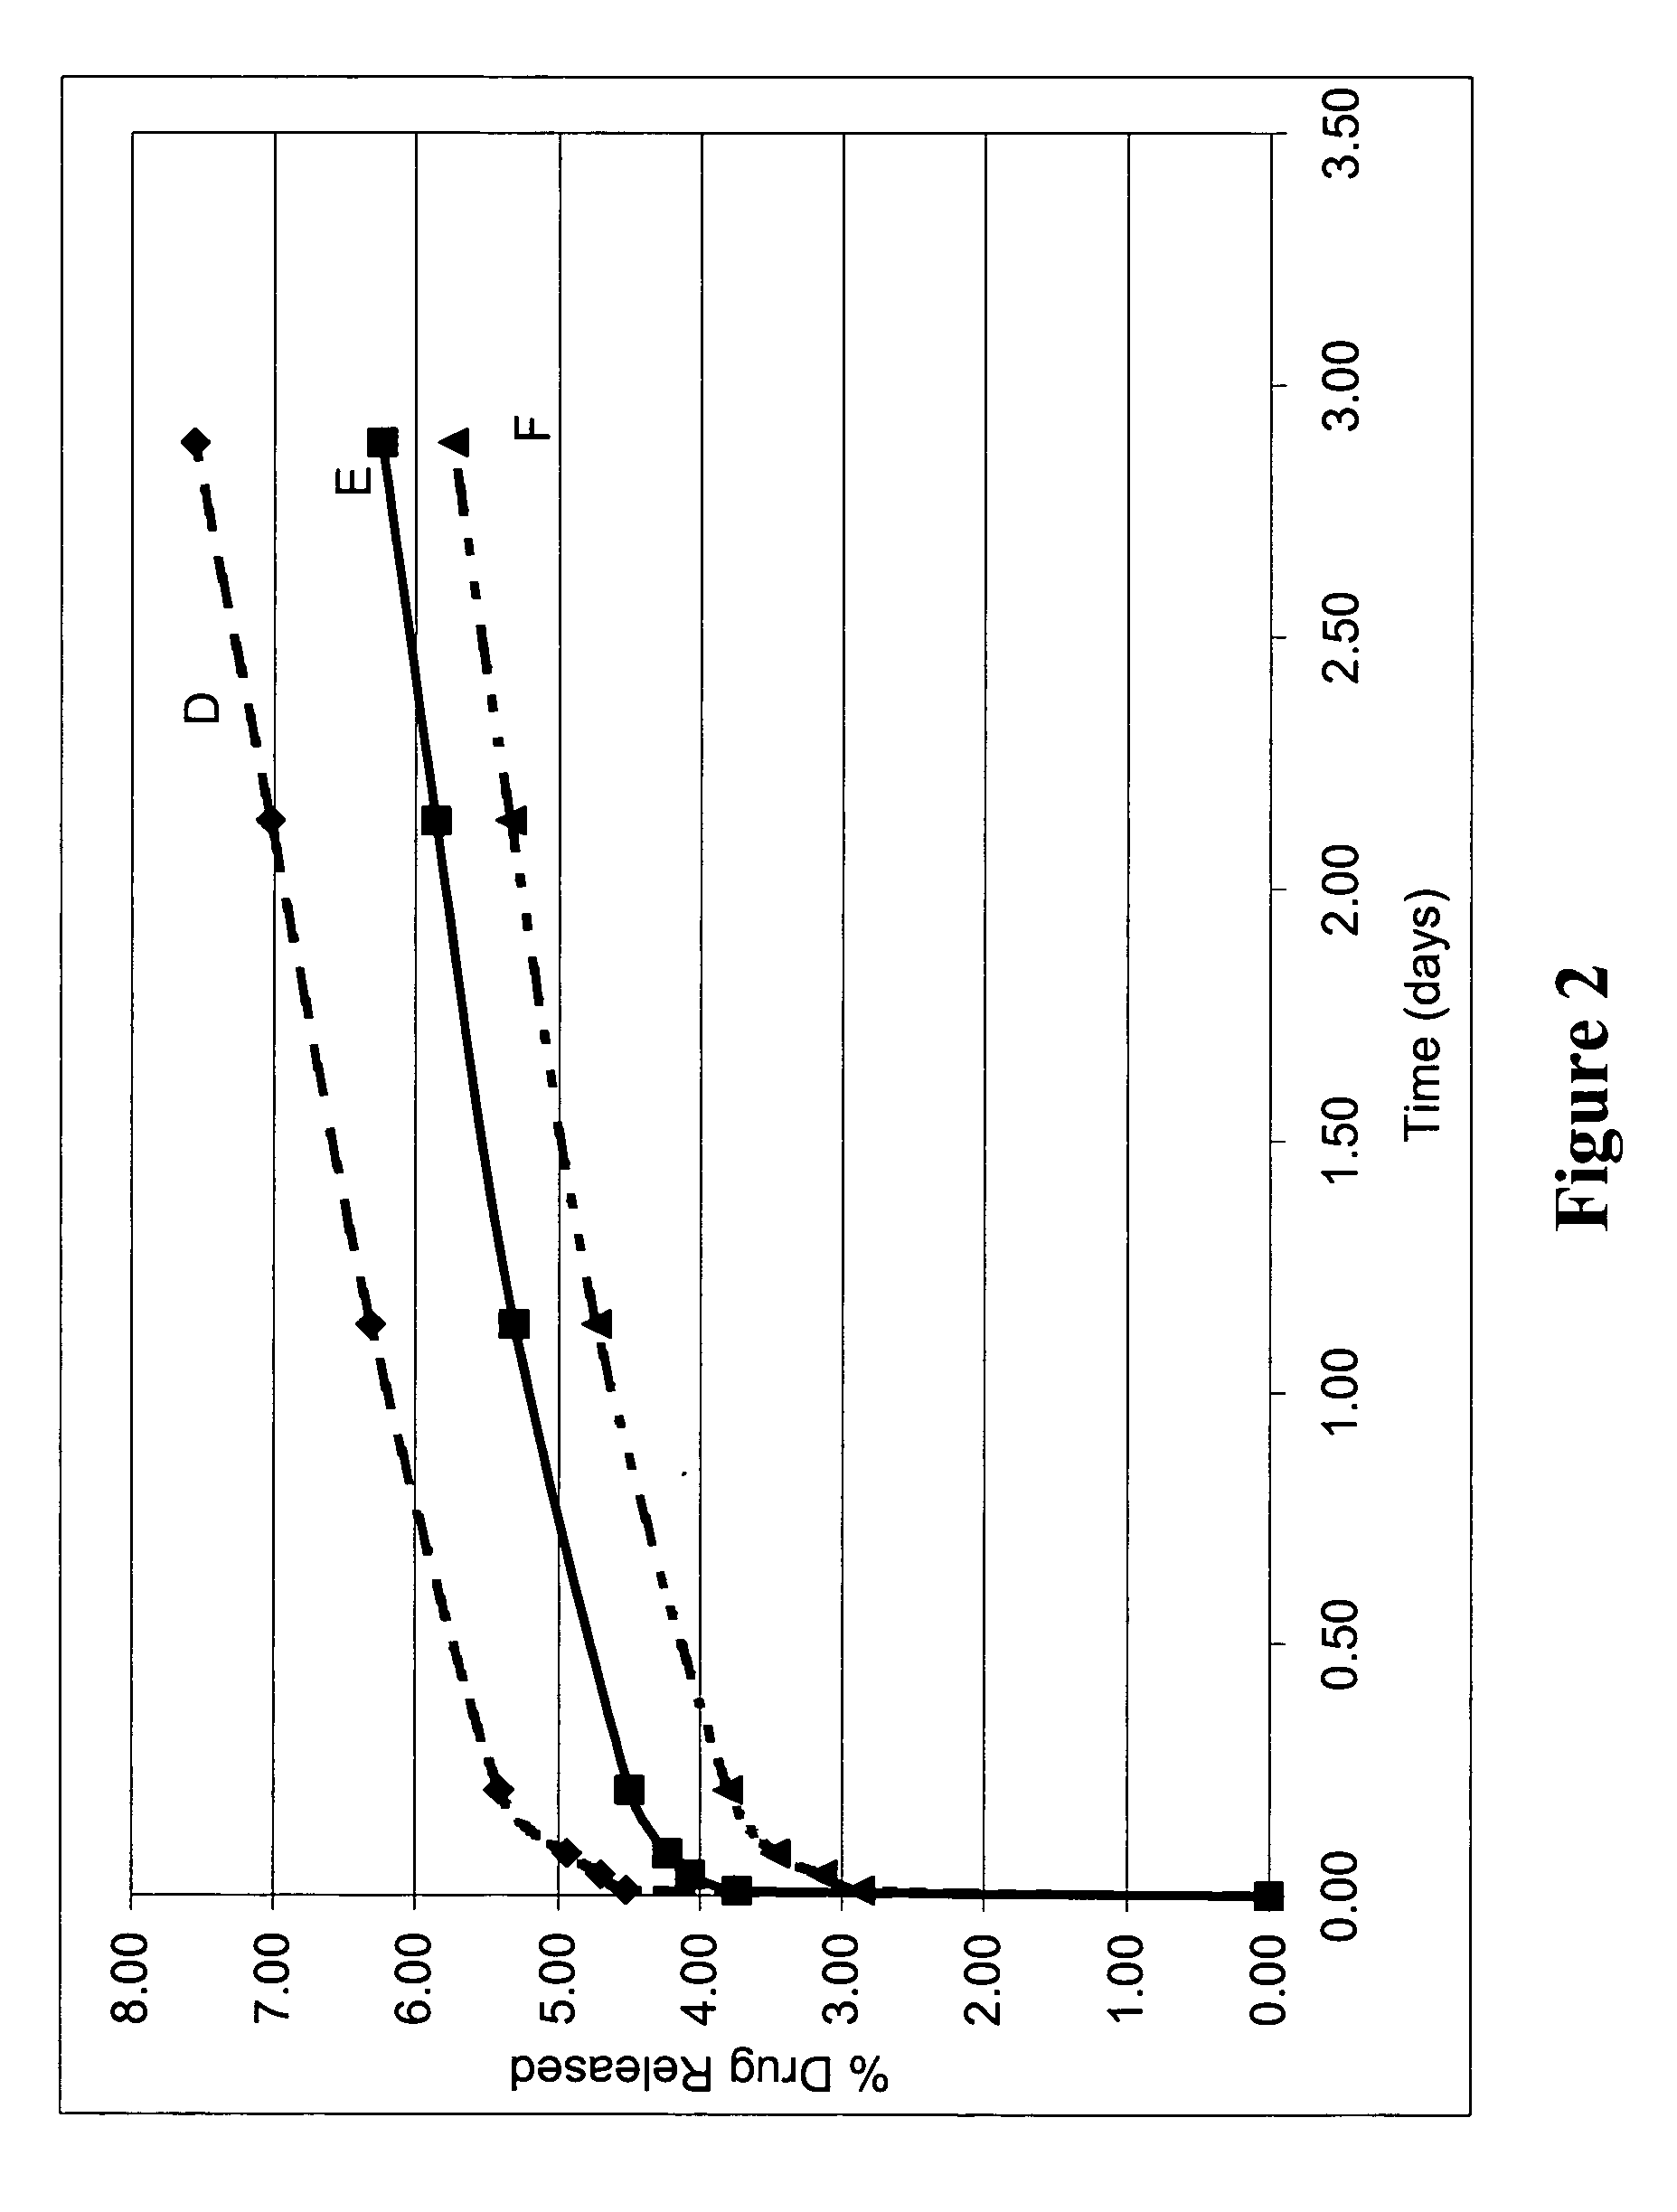 Biodegradable coating compositions including multiple layers